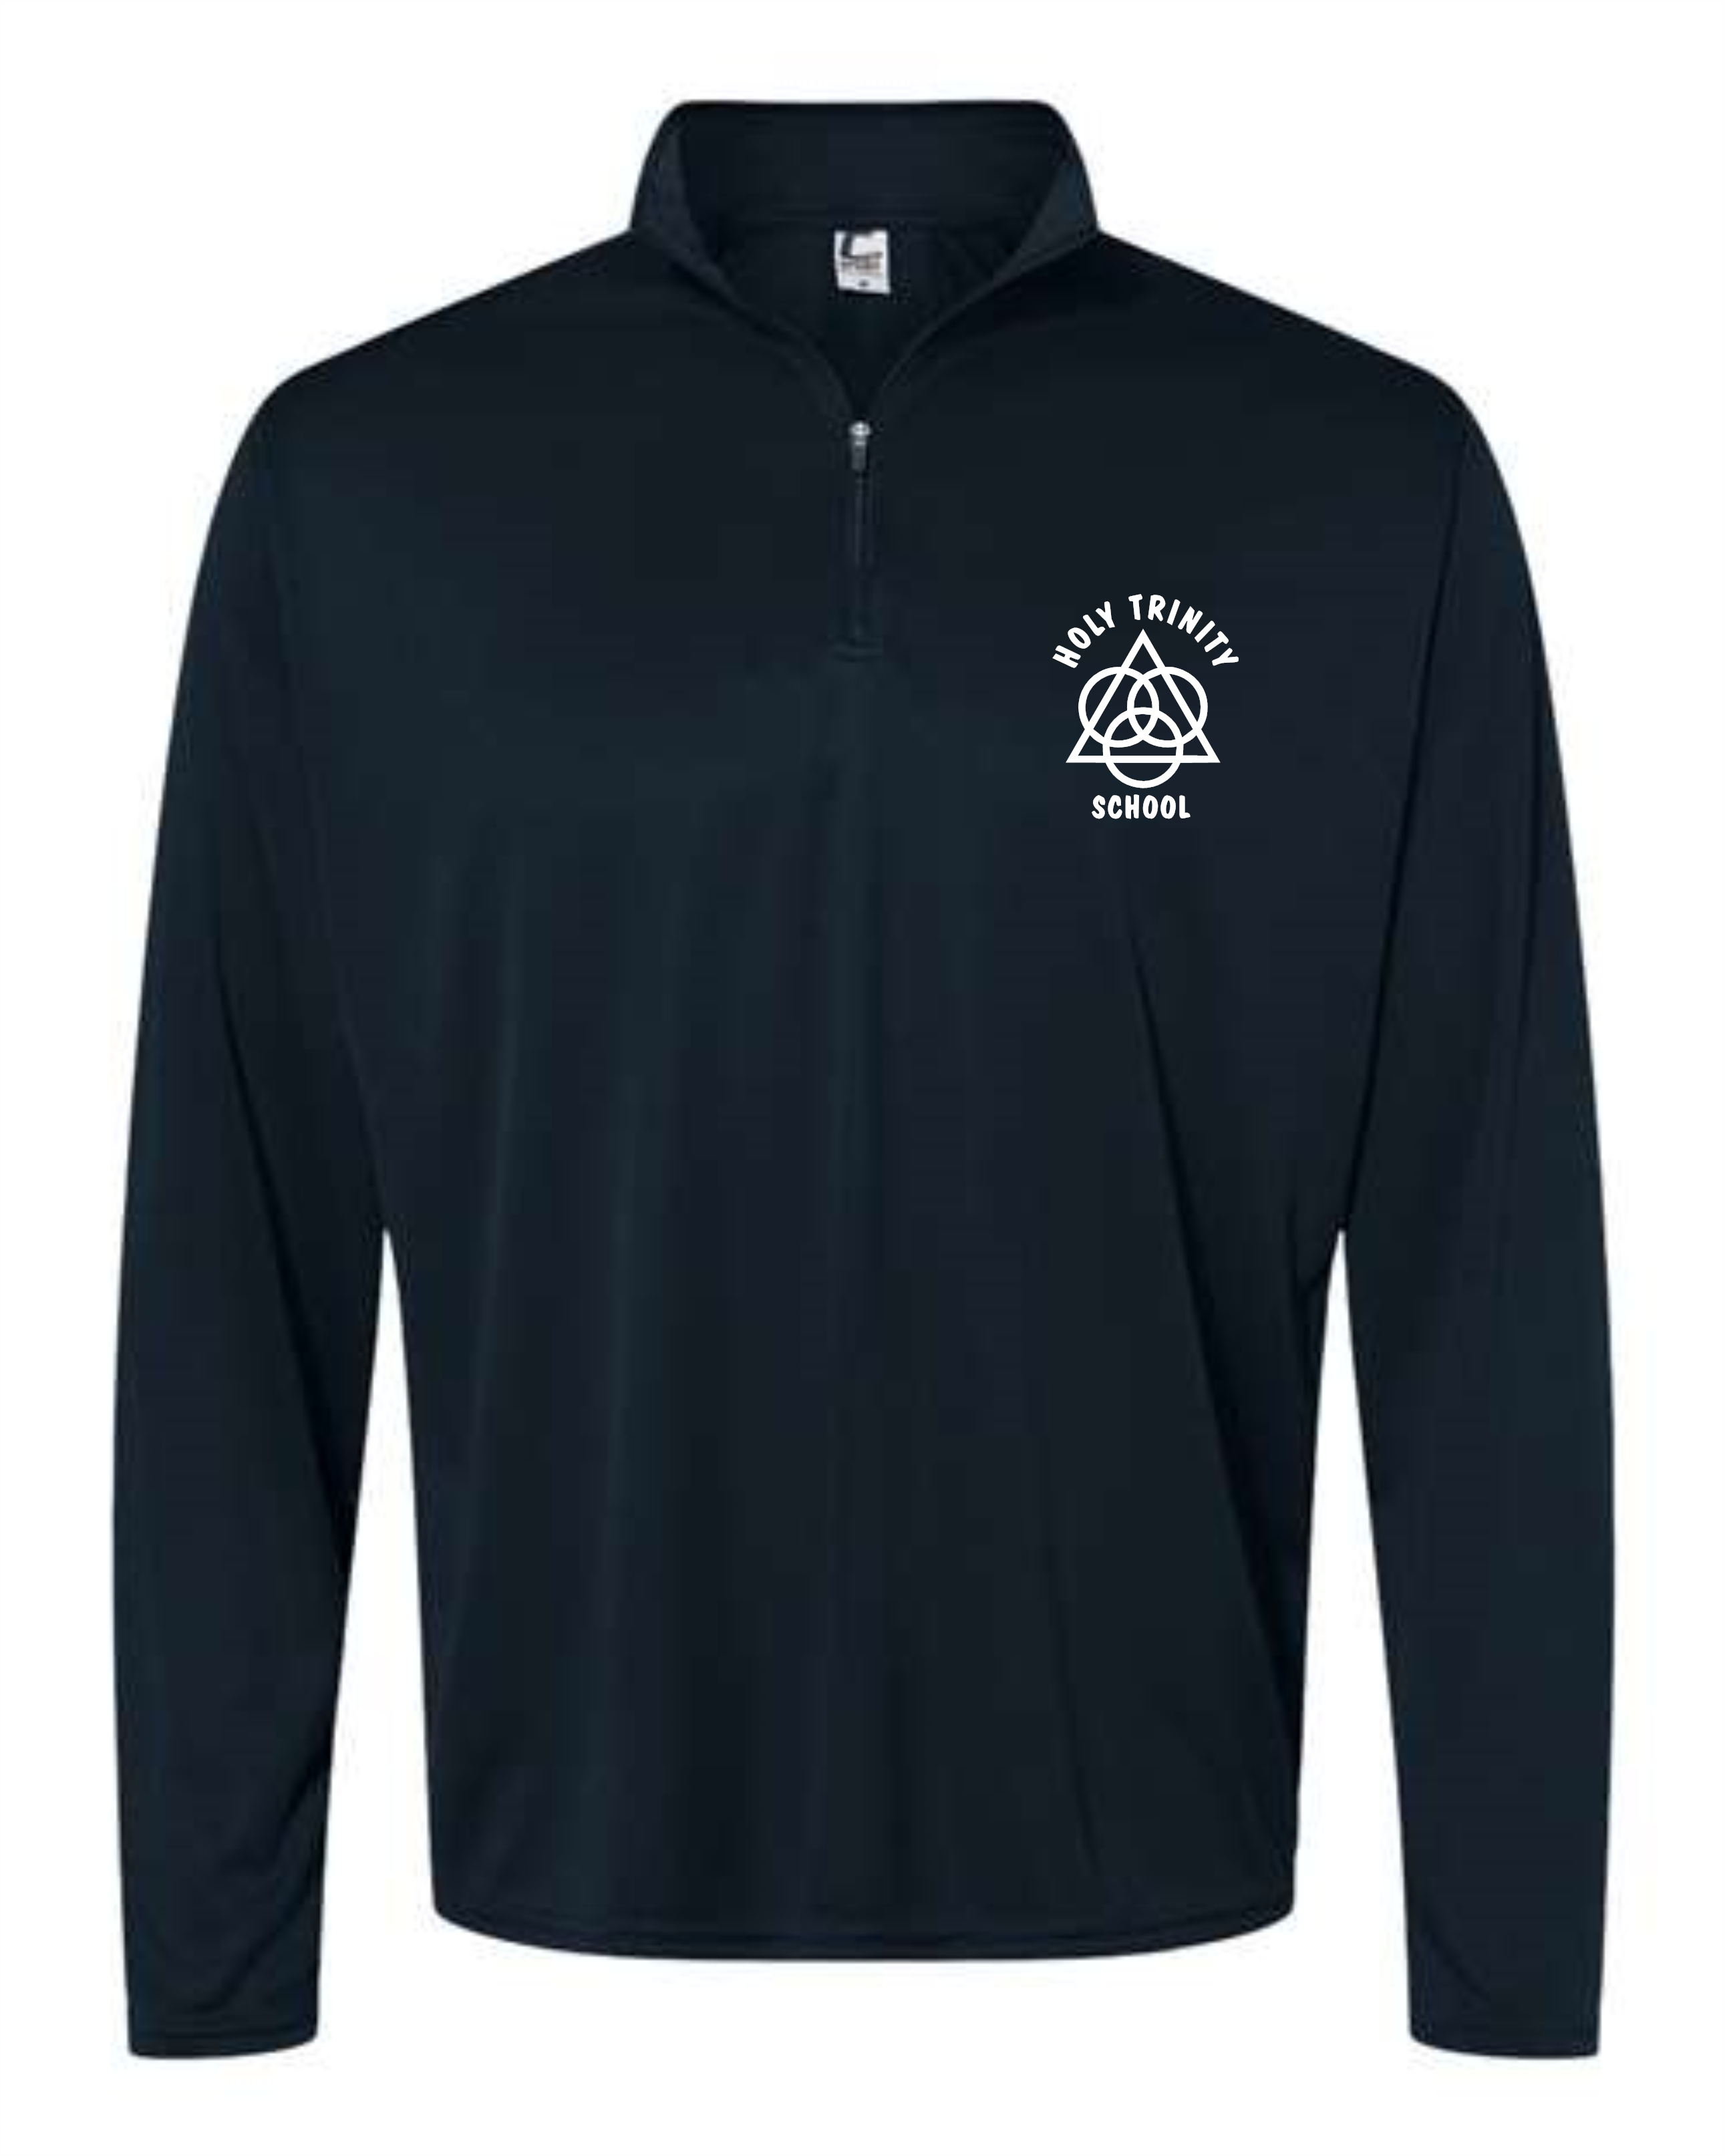 Youth/Adult Unisex Performance 1/4 Zip Pullover